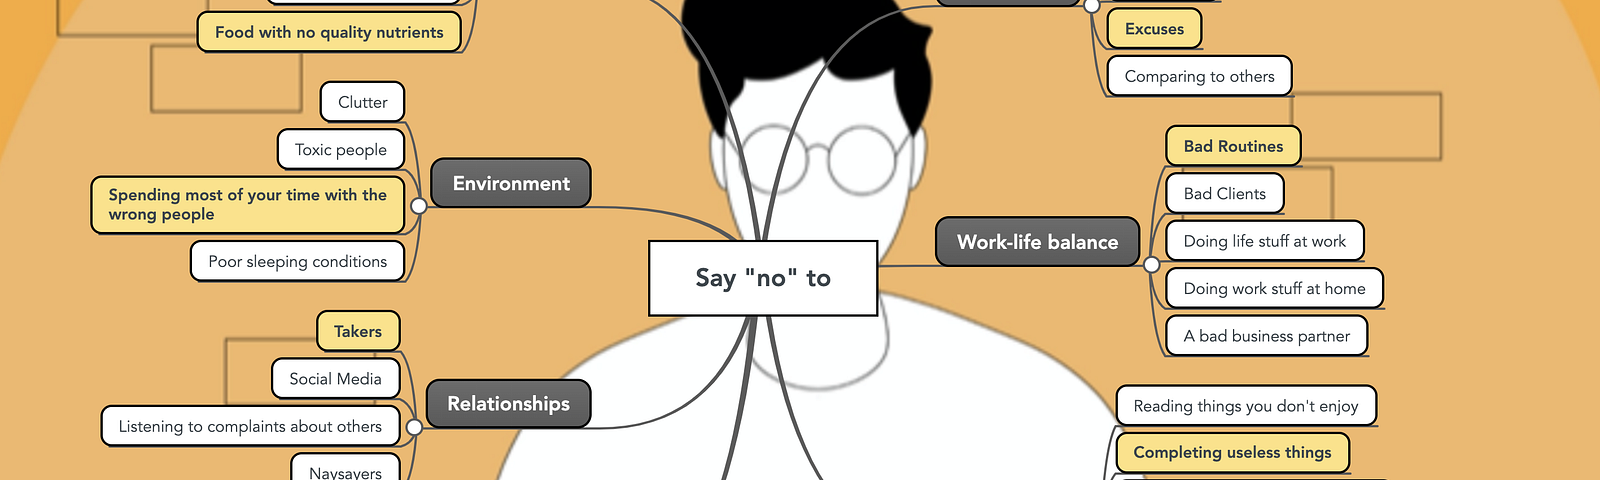 An illustration of a man taking notes, with a flow chart of “Things to Say ‘No’ to” superimposed on top of the man.